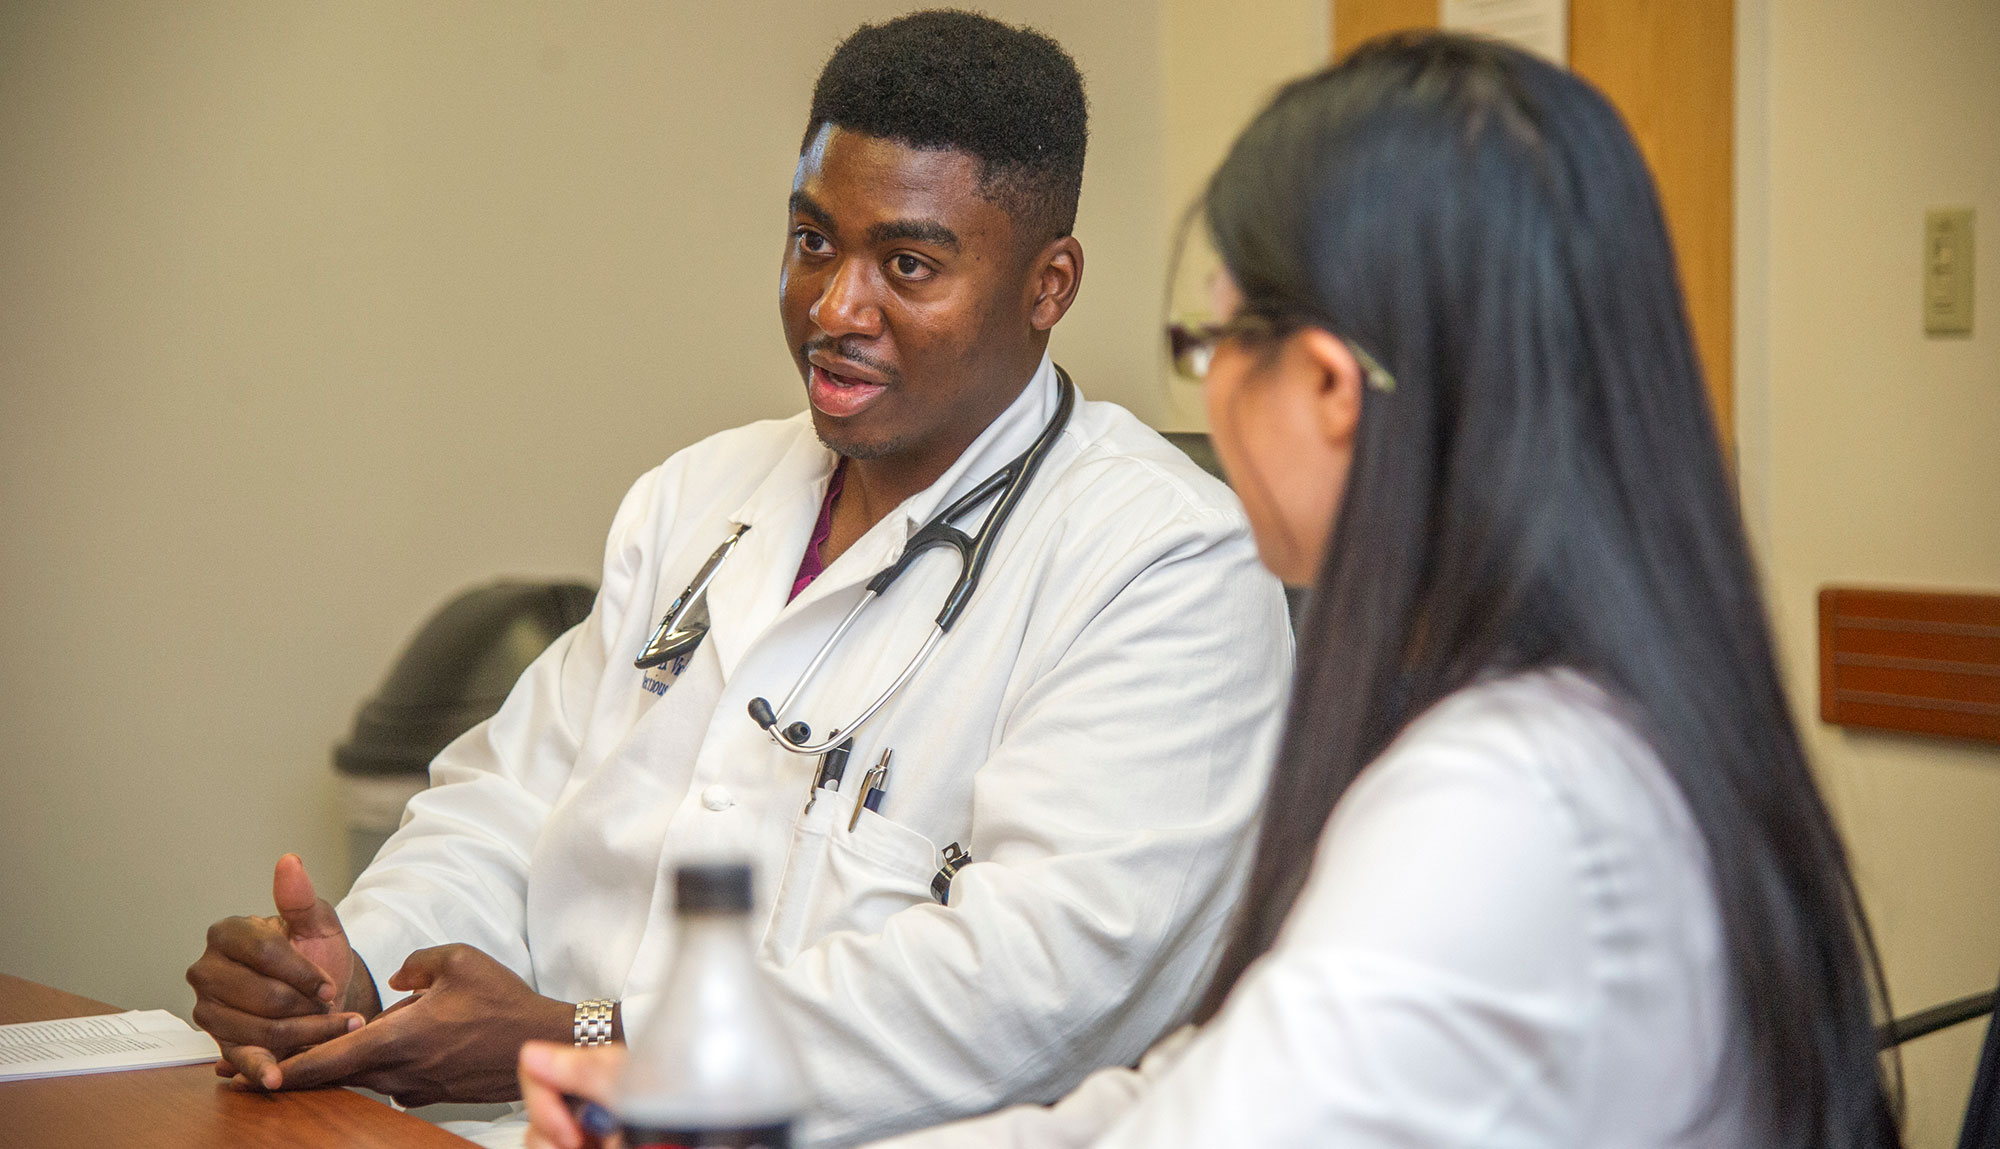 Fellows discuss strategies for treating Infectious Disease patients.